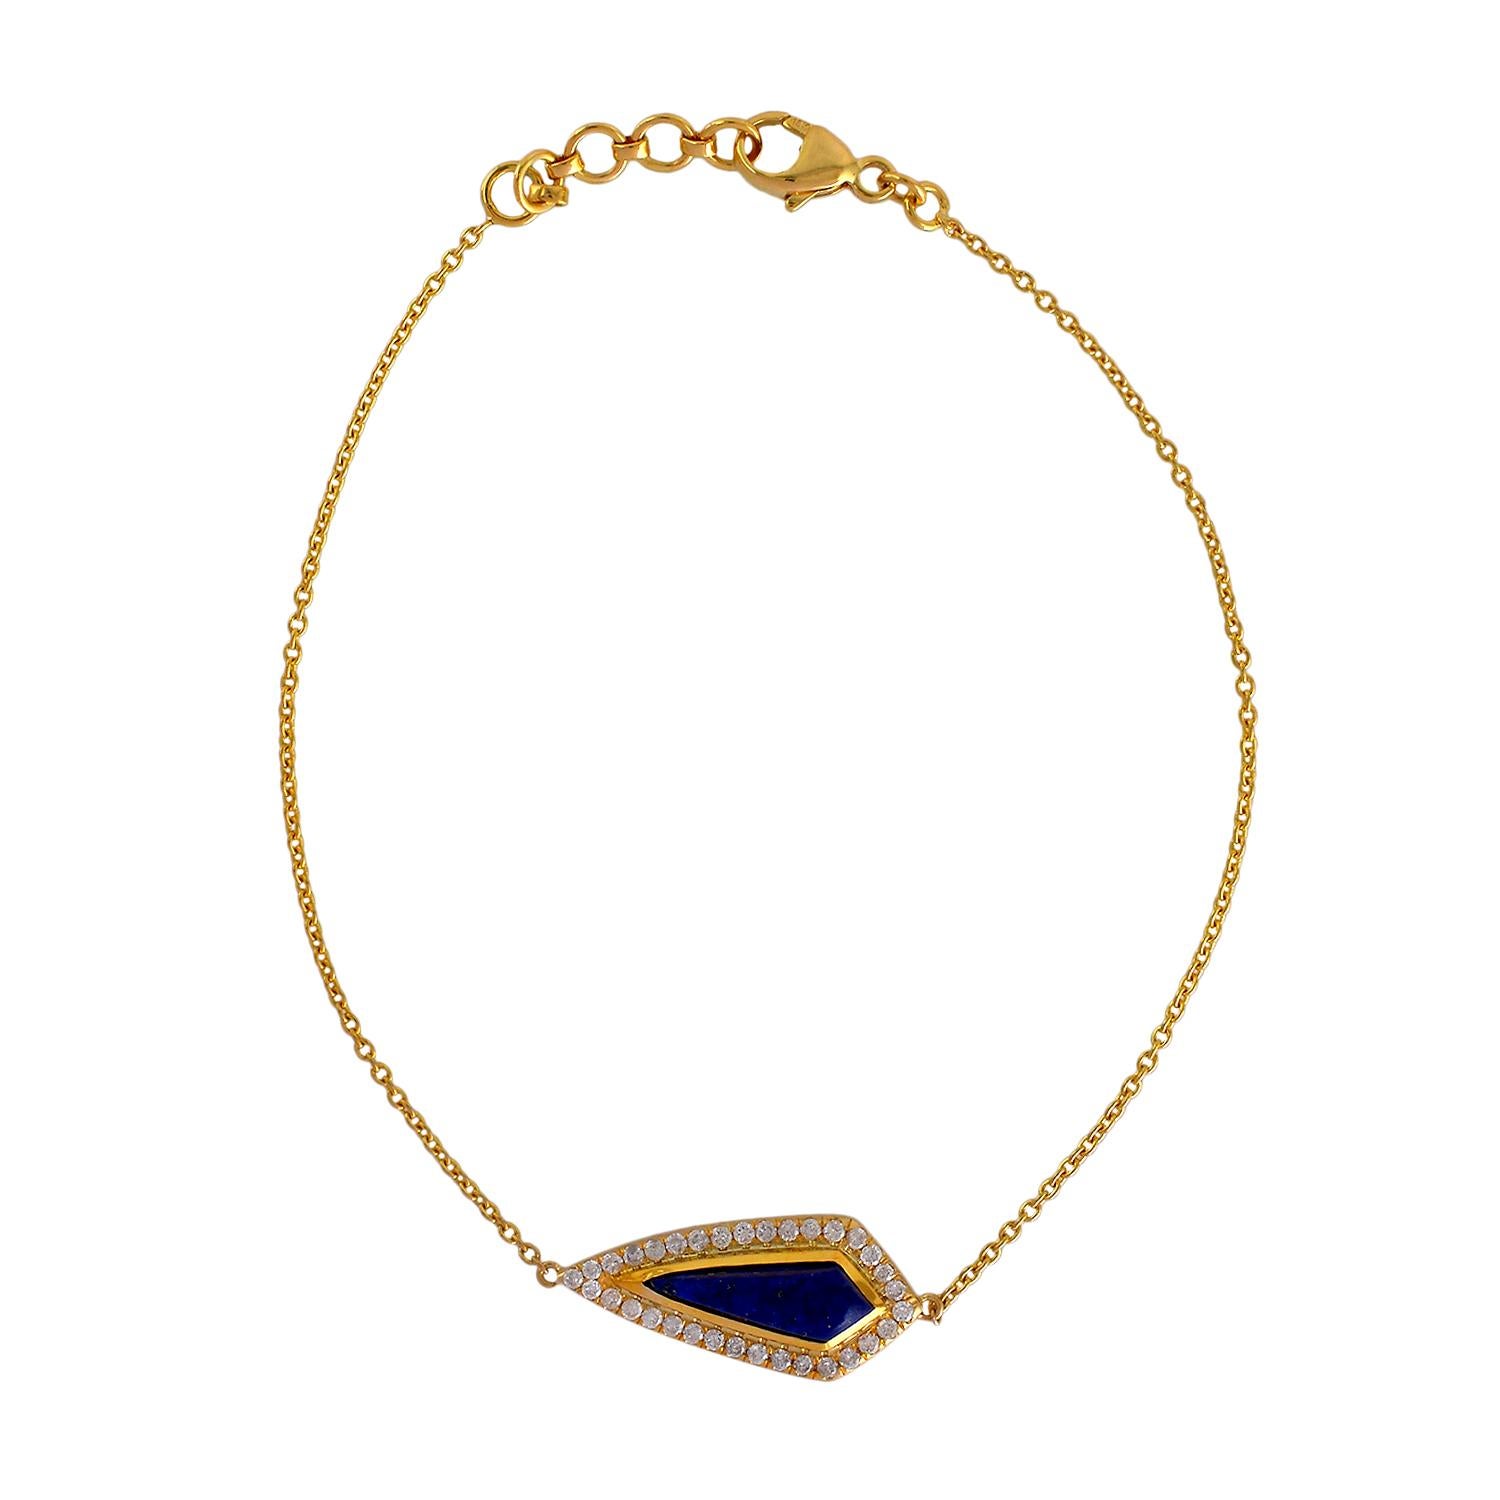 Contemporary Pear Shaped Lapis Bracelet With Pave Diamonds Made In 18k yellow Gold For Sale